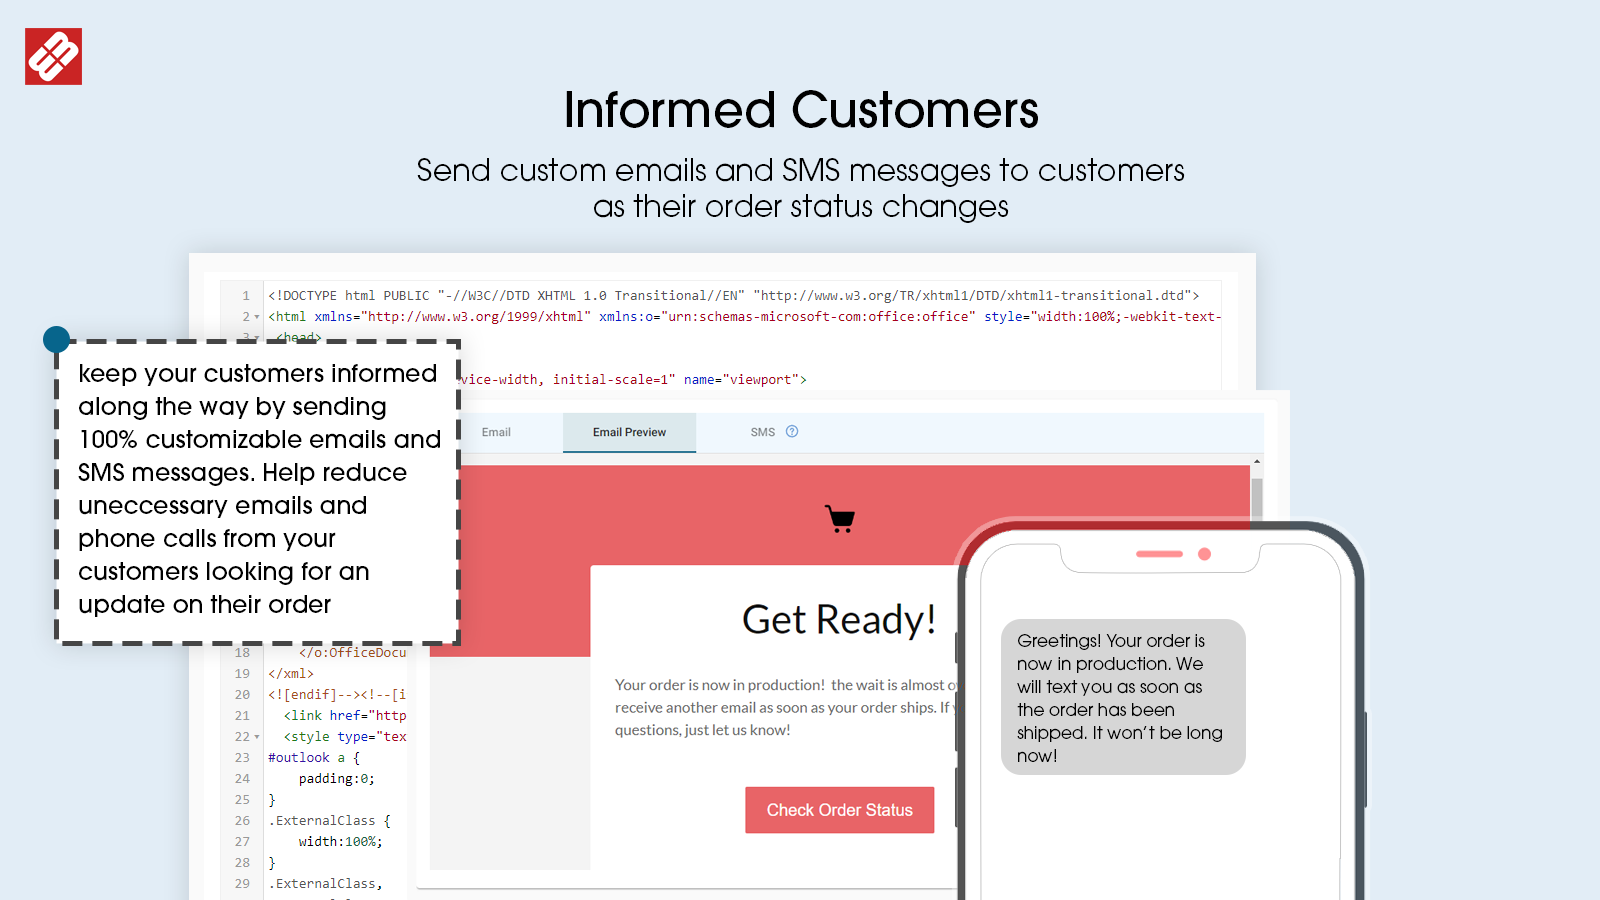 Send custom emails and sms messages to your customers